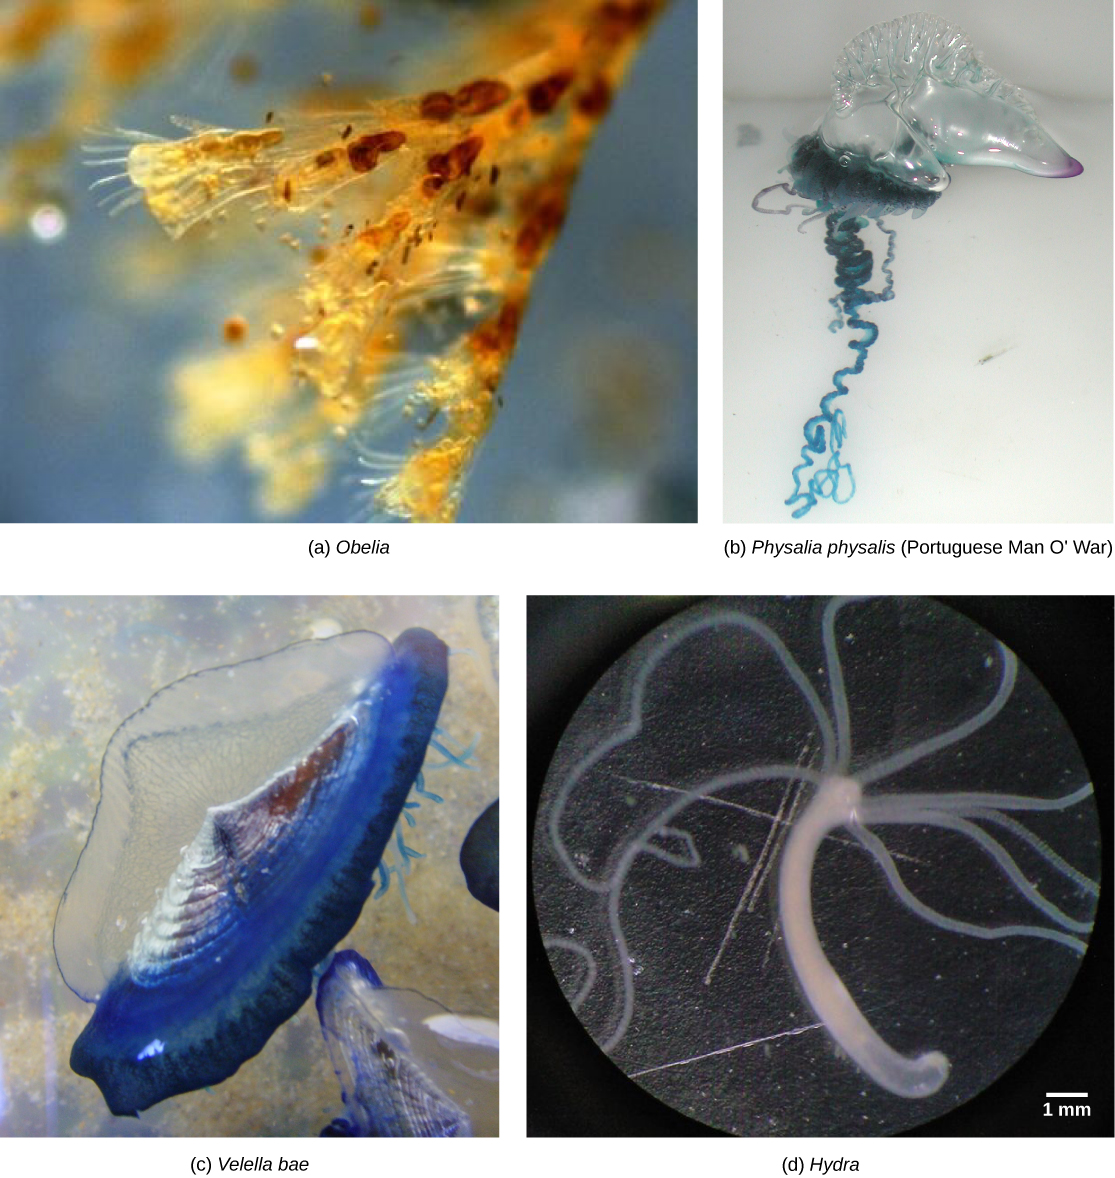 Photo a shows Obelia, which has a body composed of branching polyps. Photo b shows a Portuguese Man O’ War, which has ribbon-like tentacles dangling from a clear, bulbous structure, resembling an inflated plastic bag. Photo c shows Velella bae, which resembles a flying saucer with a blue bottom and a clear, dome-shaped top. Photo d shows a hydra with long tentacles, extending from a tube-shaped body.